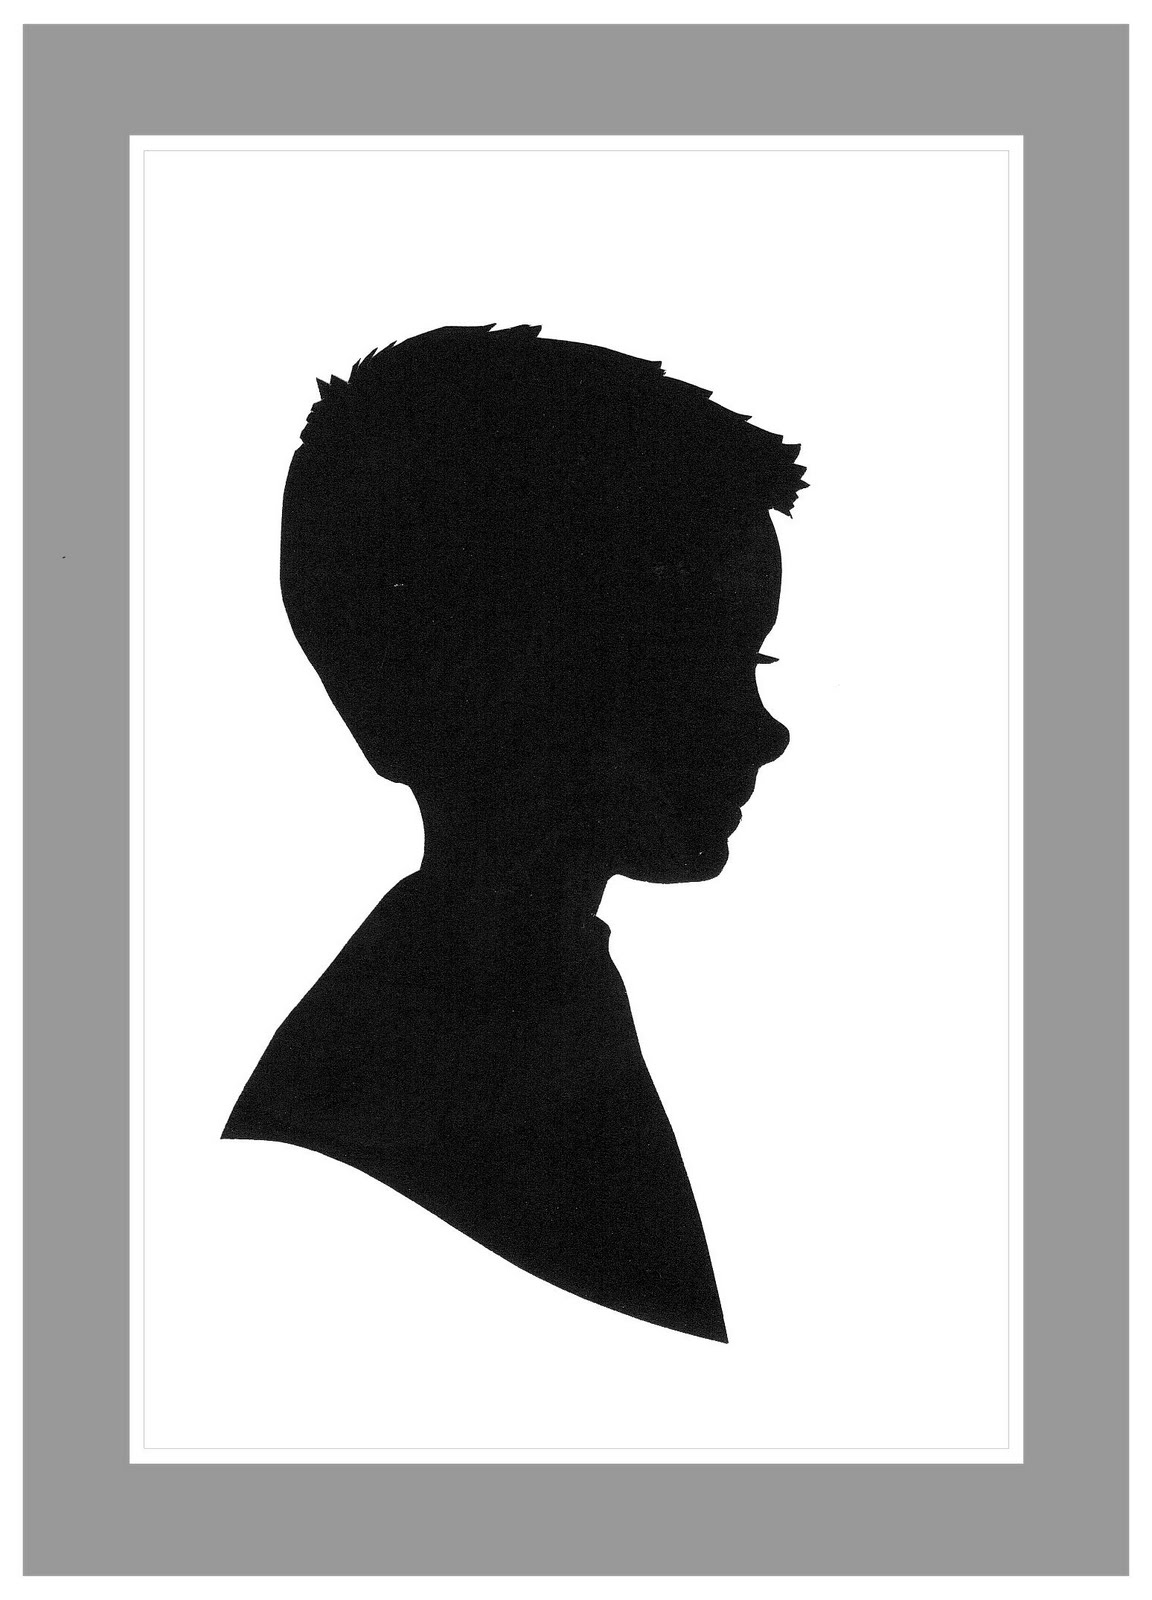 Images For > Boy Silhouette Png